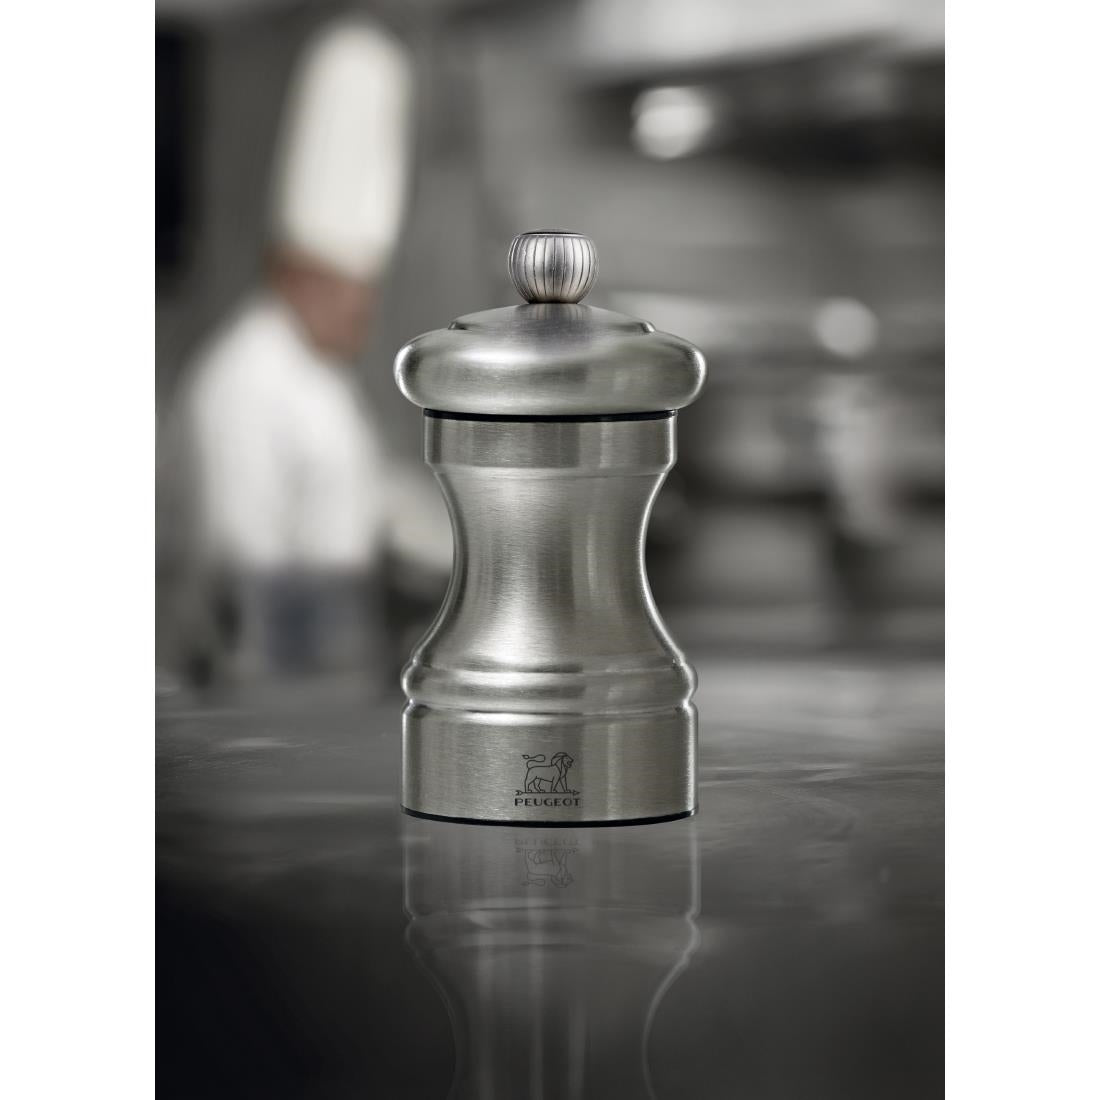 CU562 Peugeot Bistro Stainless Steel Pepper Mill 4in JD Catering Equipment Solutions Ltd